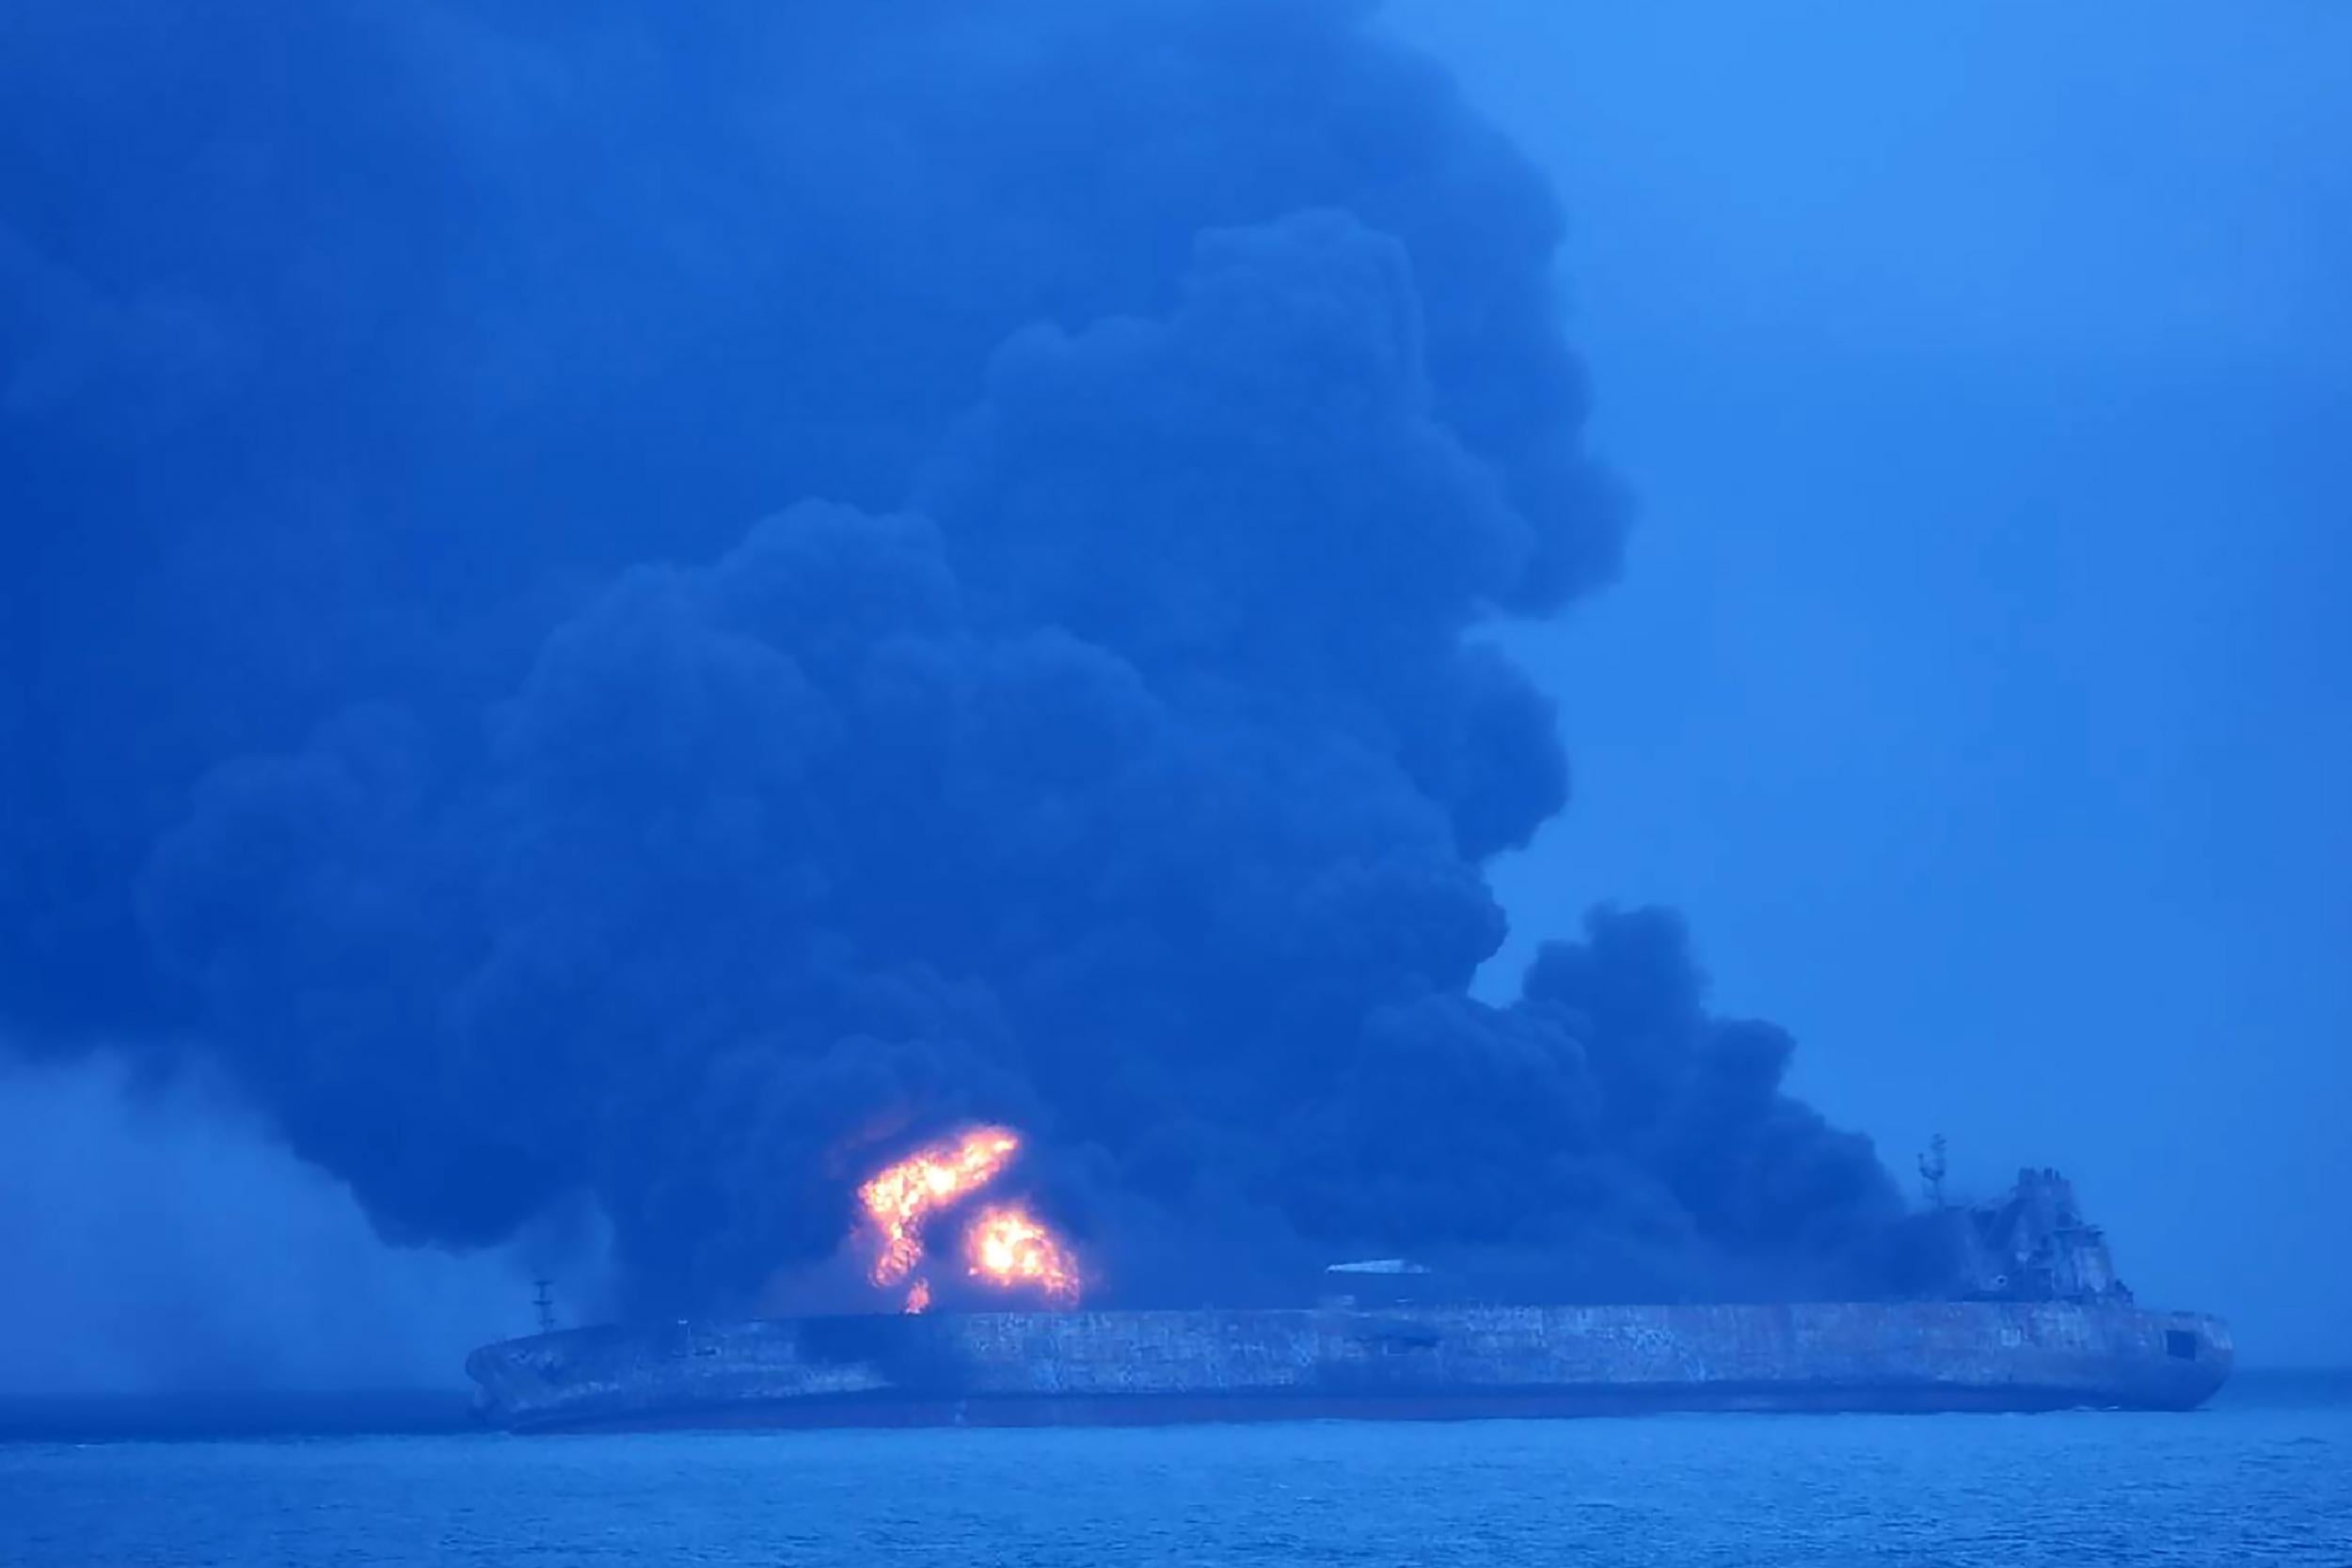 Tanker 'Sanchi' on fire after a collision with a cargo ship at sea